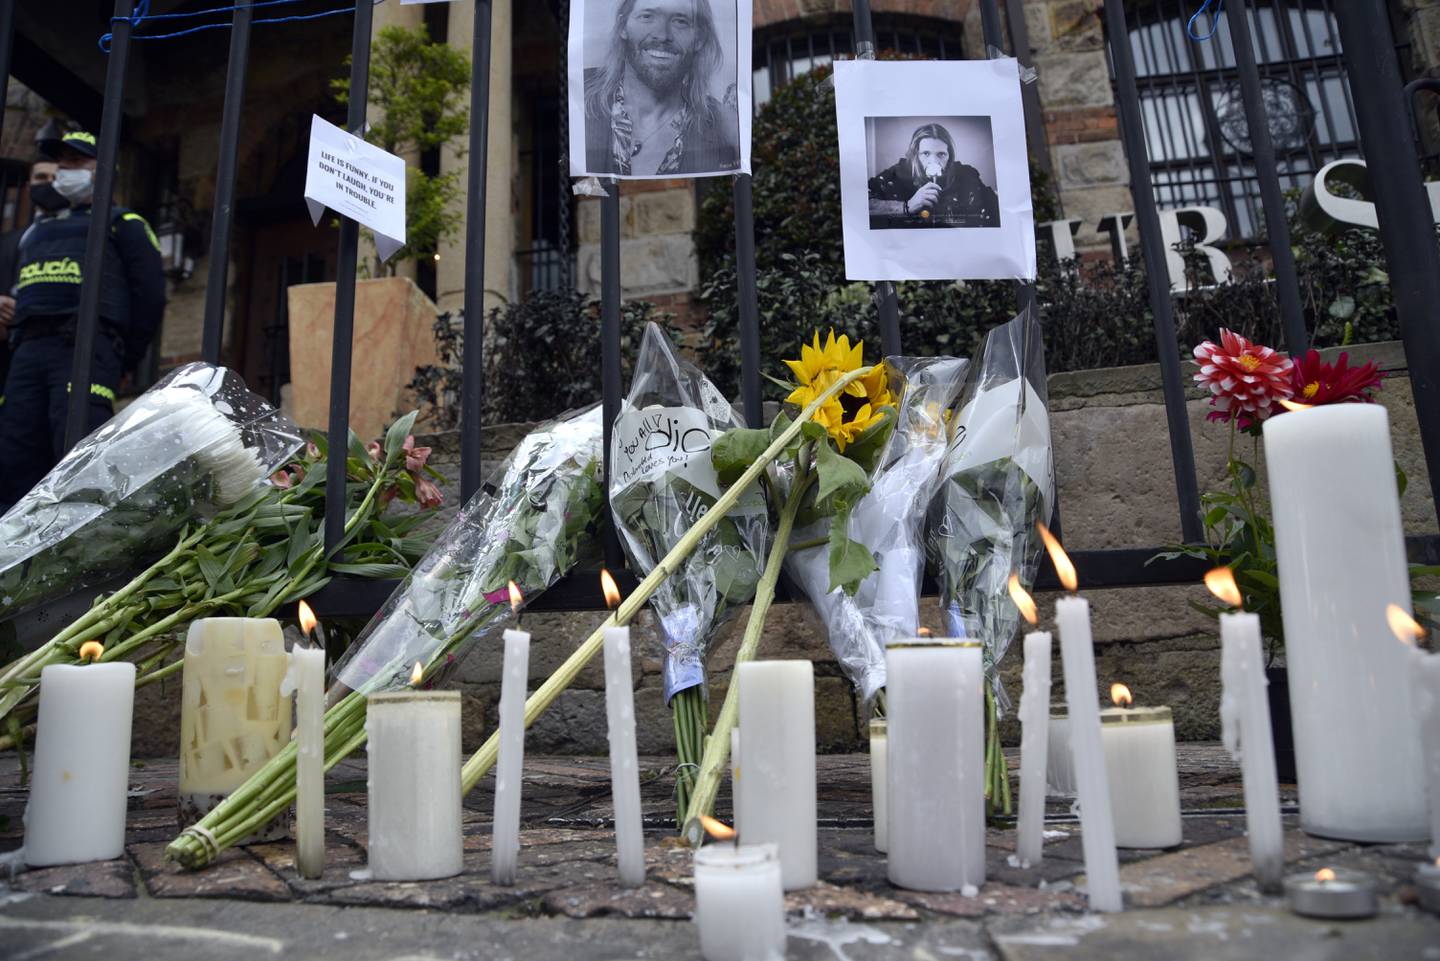 Fans mourned outside Bogotá's Casa Medina Hotel, where Taylor Hawkins died in March. Getty Images